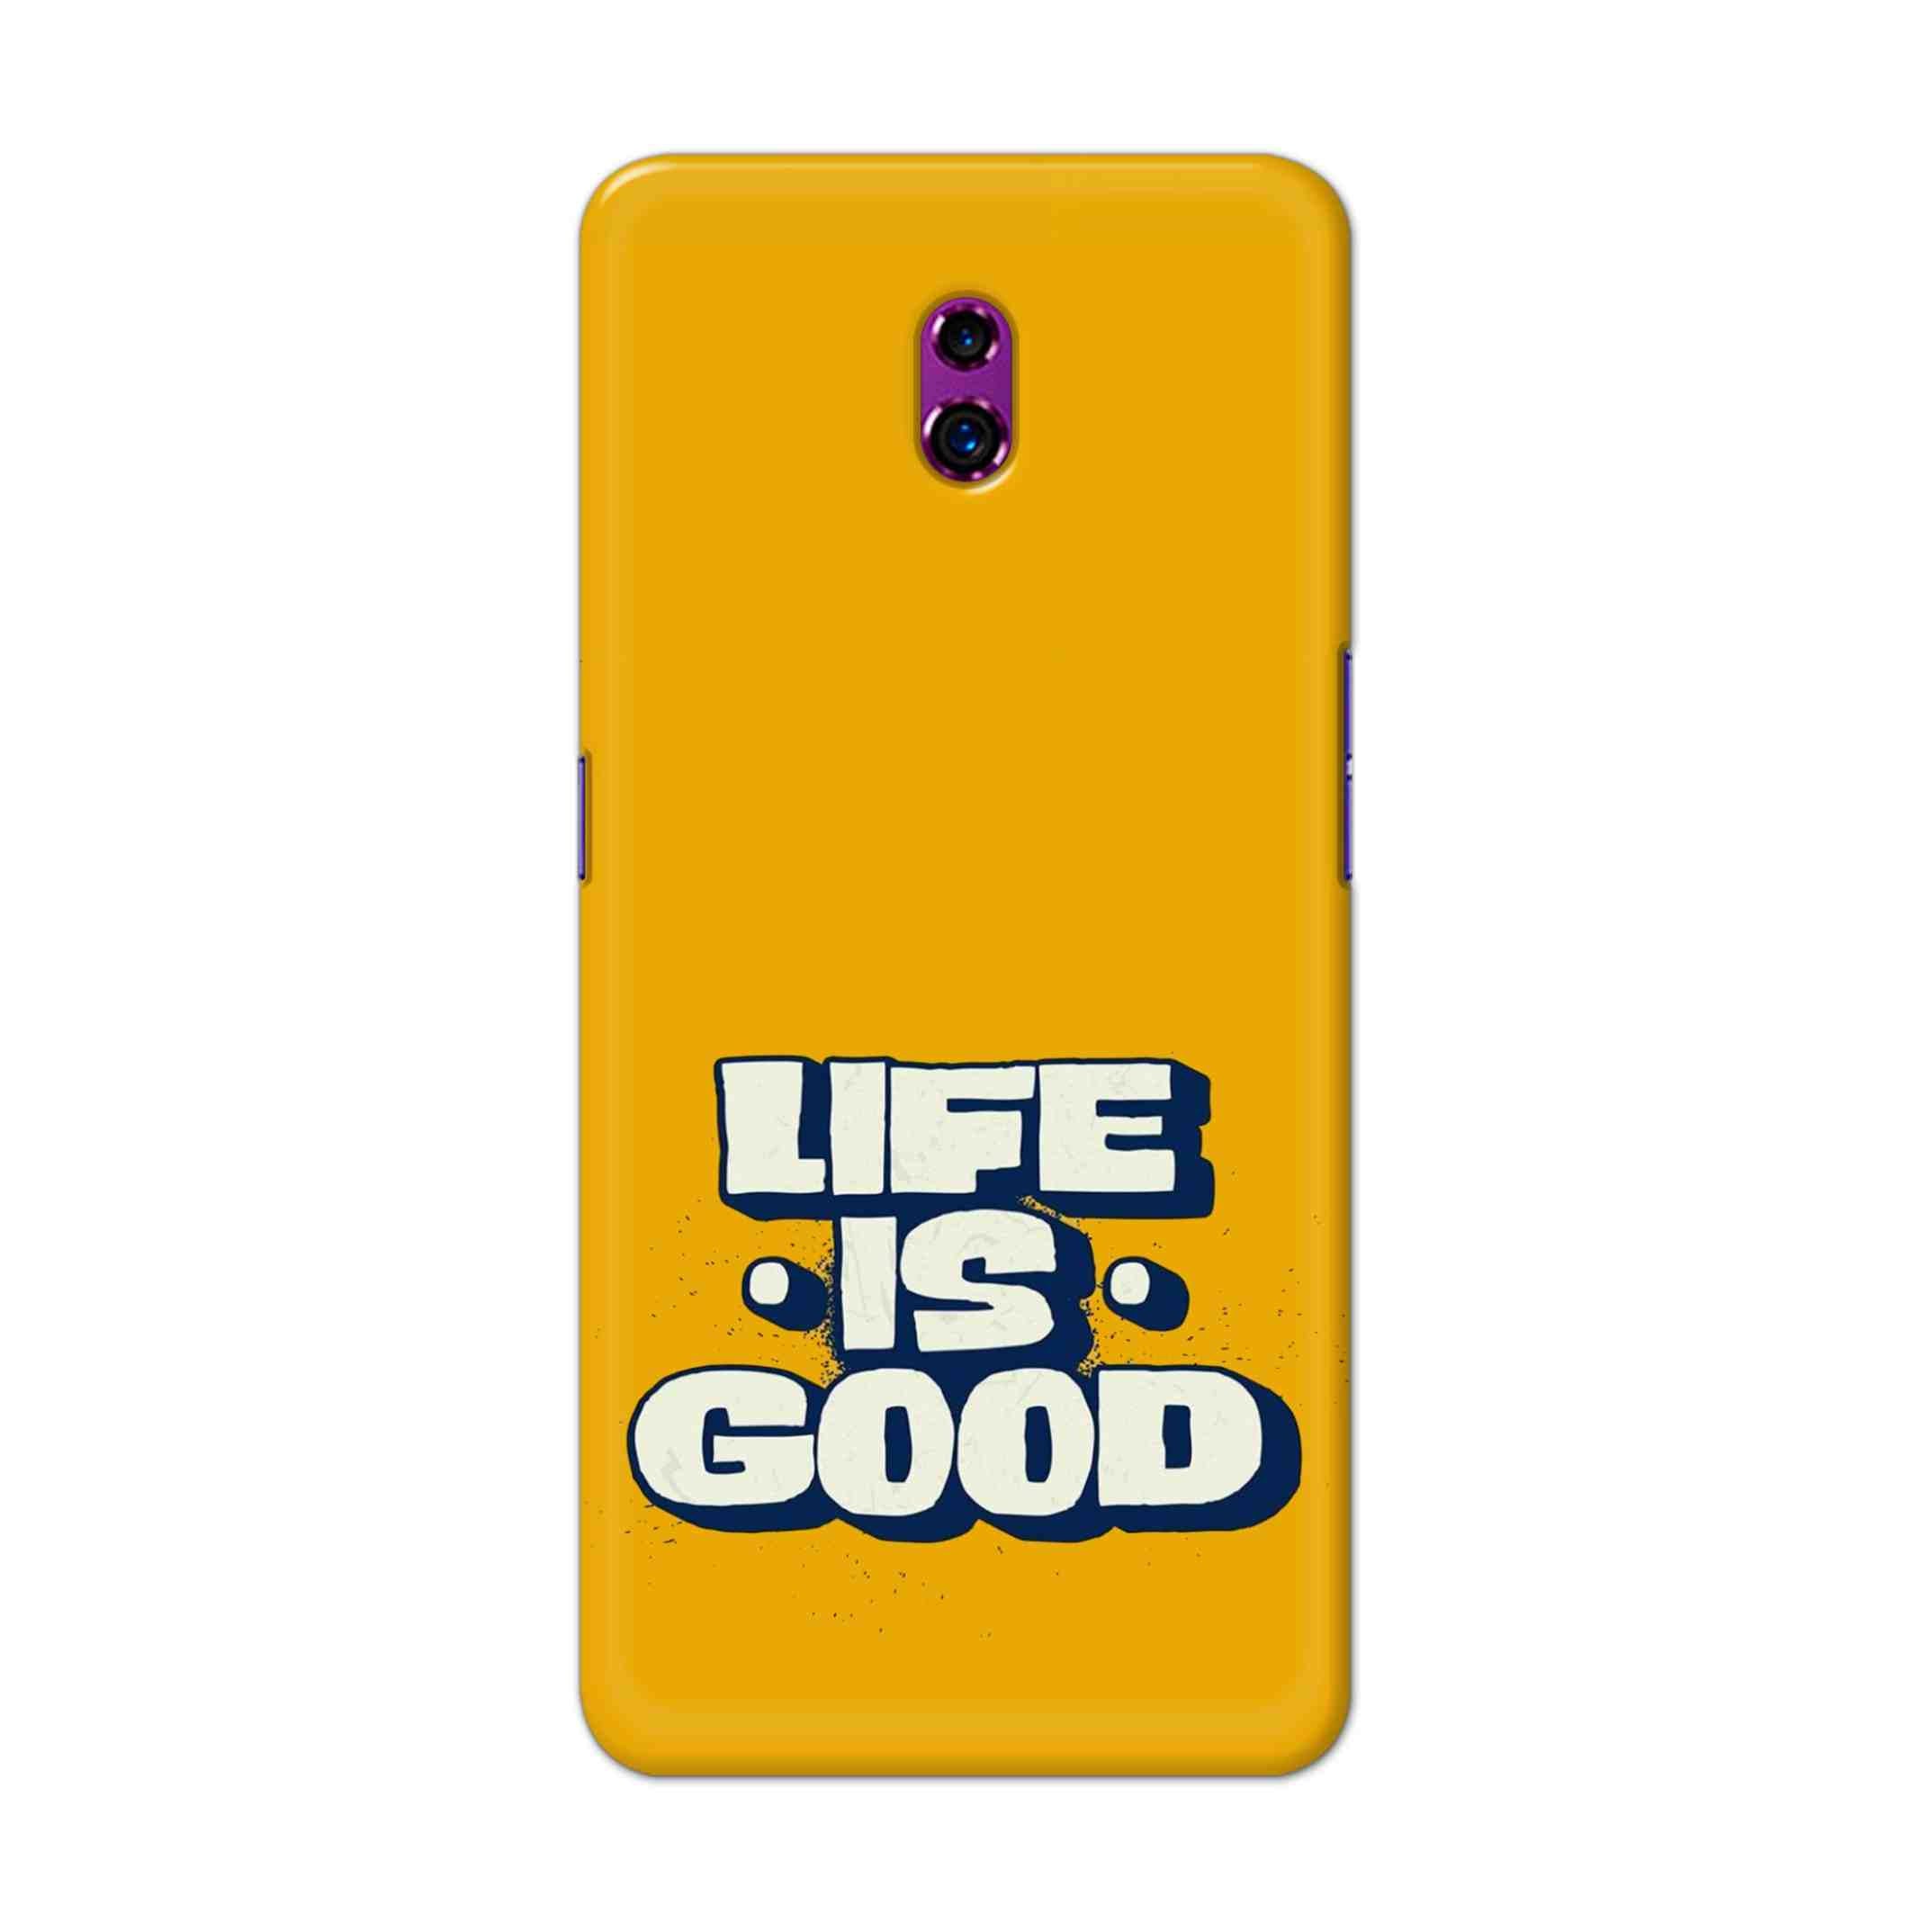 Buy Life Is Good Hard Back Mobile Phone Case Cover For Oppo Reno Online